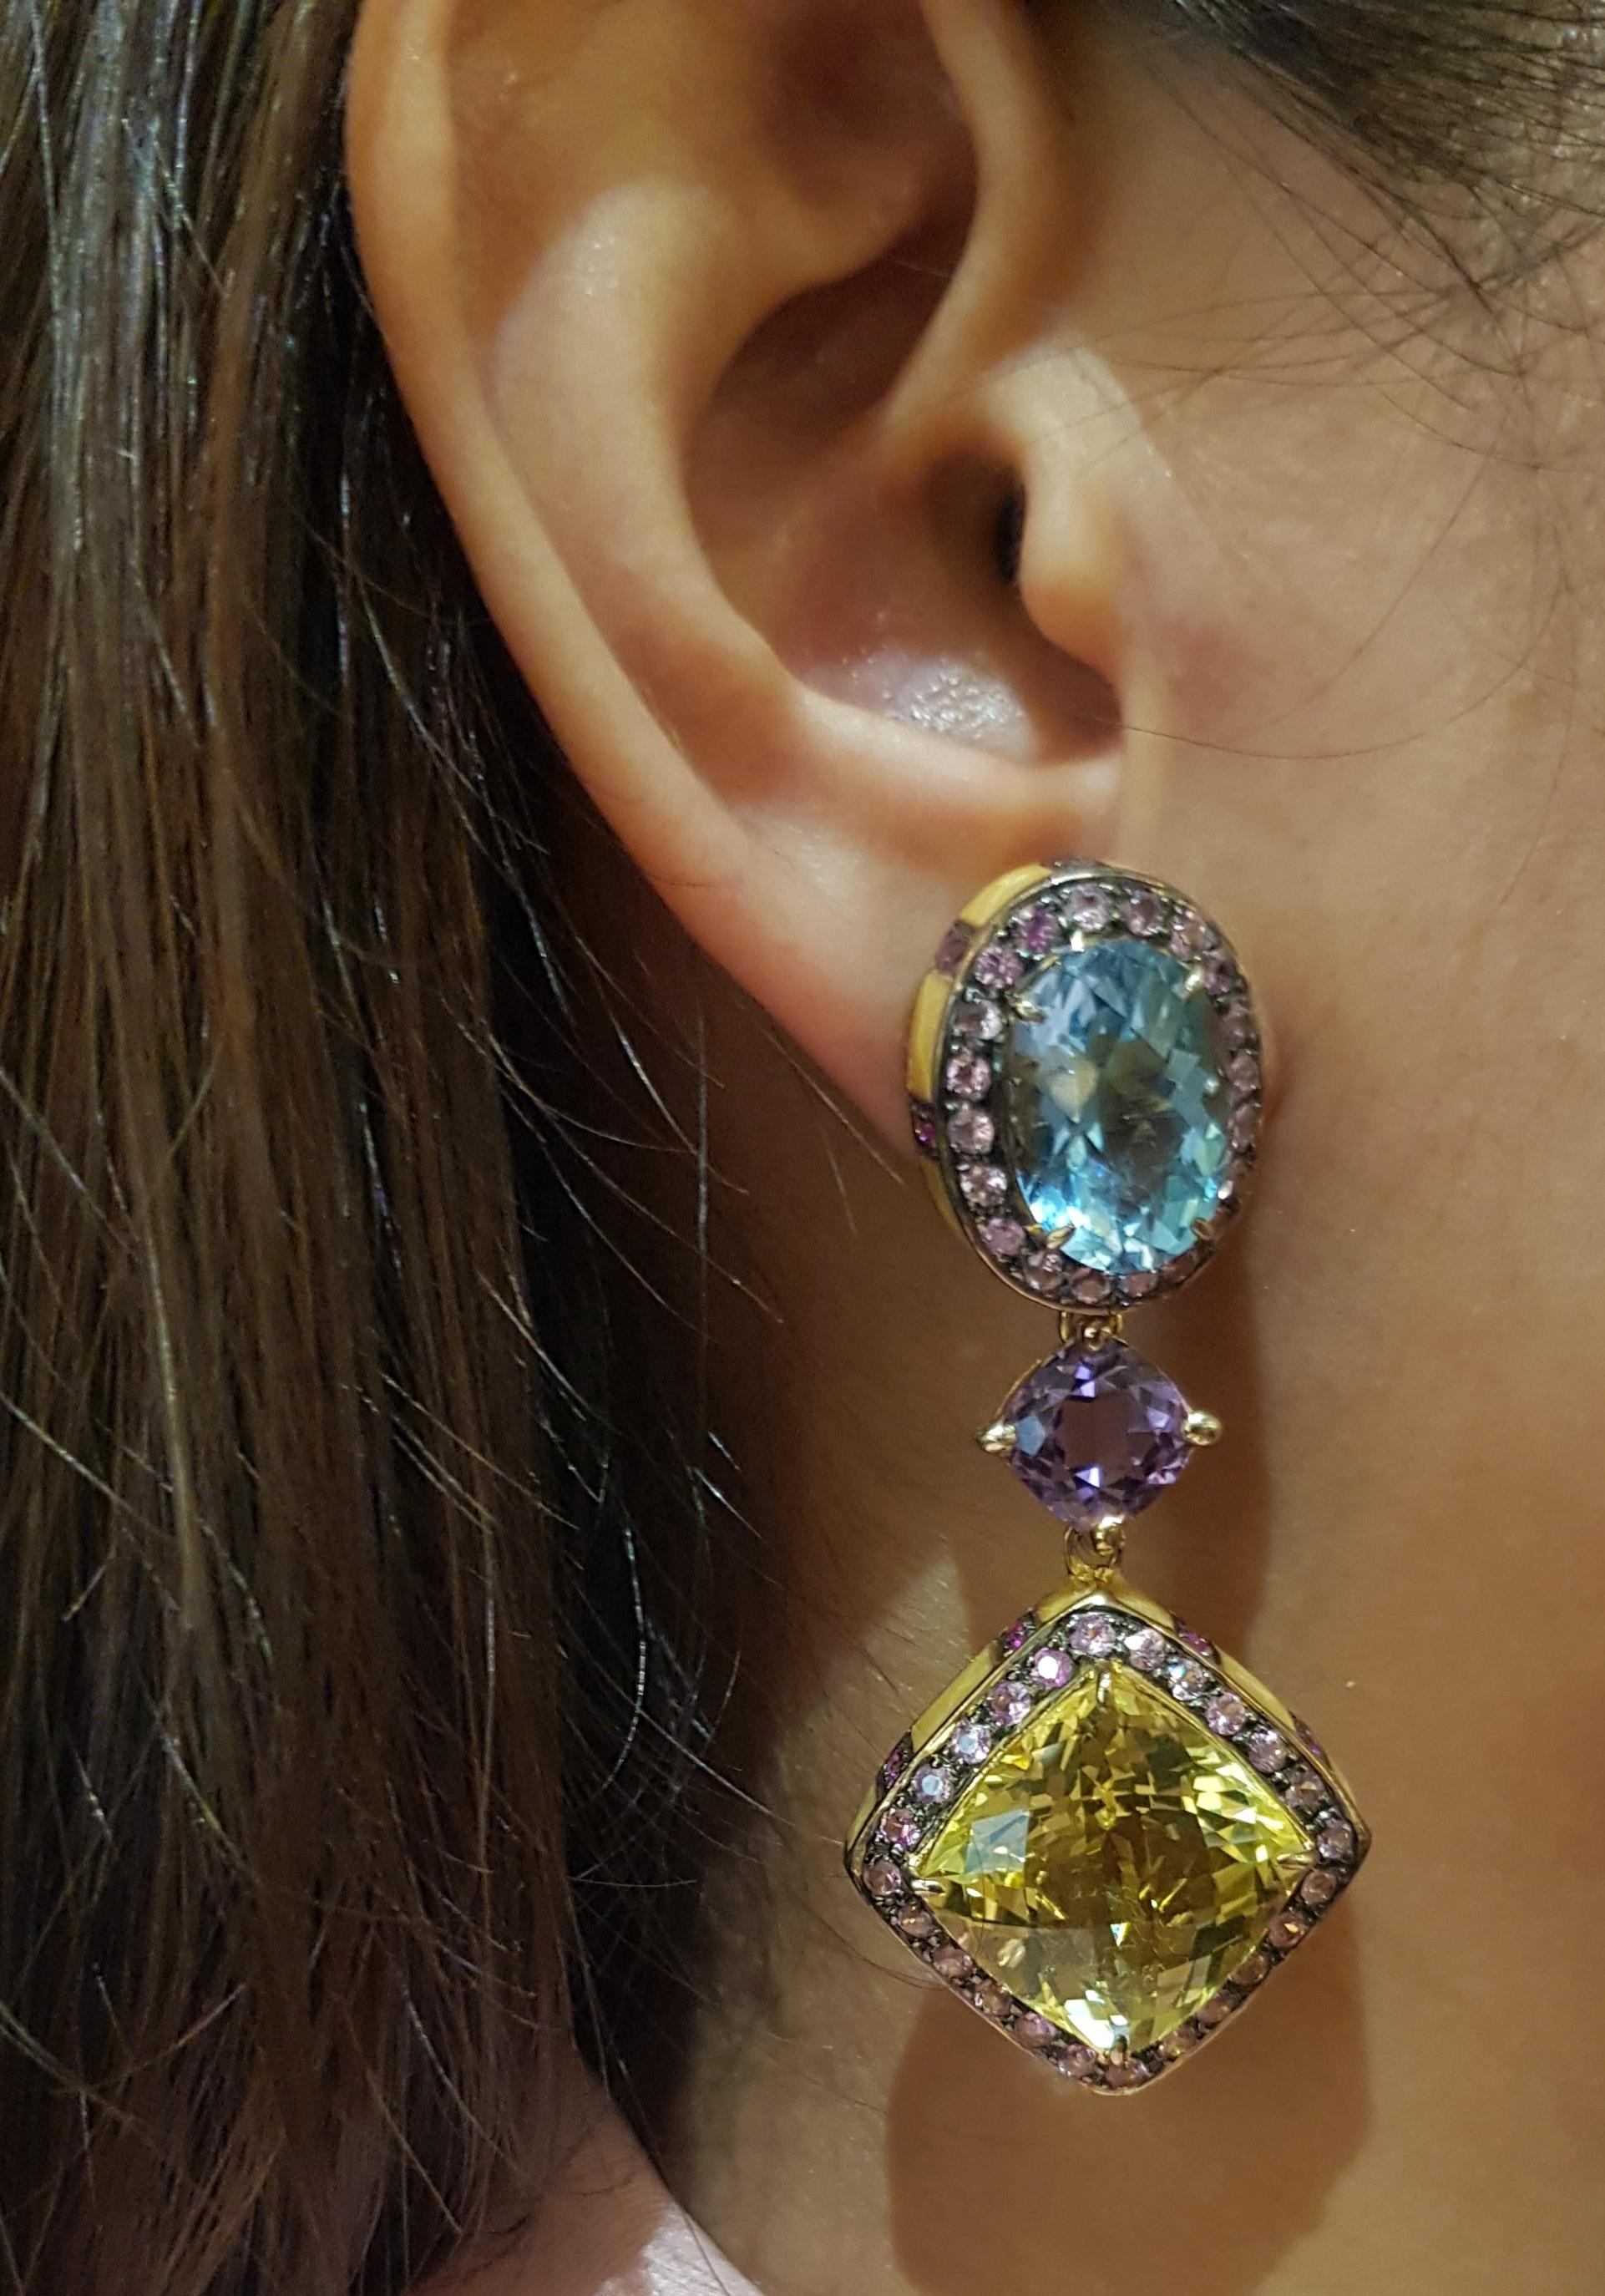 Lemon Quartz, Blue Topaz, Amethyst and Rainbow Colour Sapphire Earrings set in Silver Settings

Width:  2.5 cm 
Length: 5.7 cm
Total Weight: 36.11 grams

*Please note that the silver setting is plated with gold and rhodium to promote shine and help